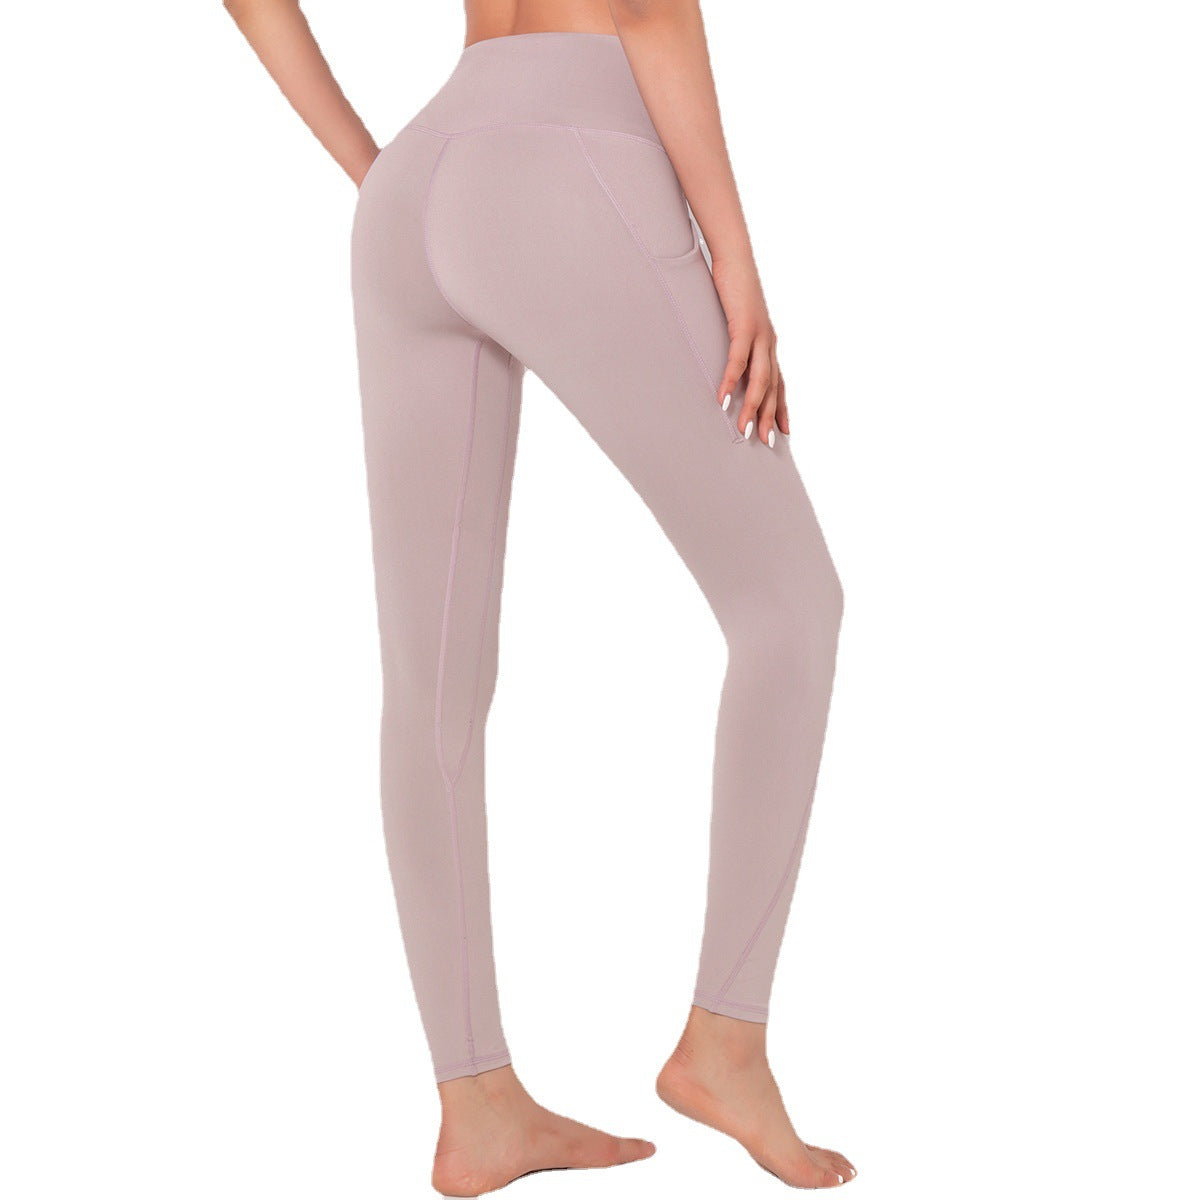 Spot Lulu New High Waist Hip Lift Nude Feel Yoga Pants Women  Solid Color Quick-Drying Tight Sportswear Running Fitness Pants